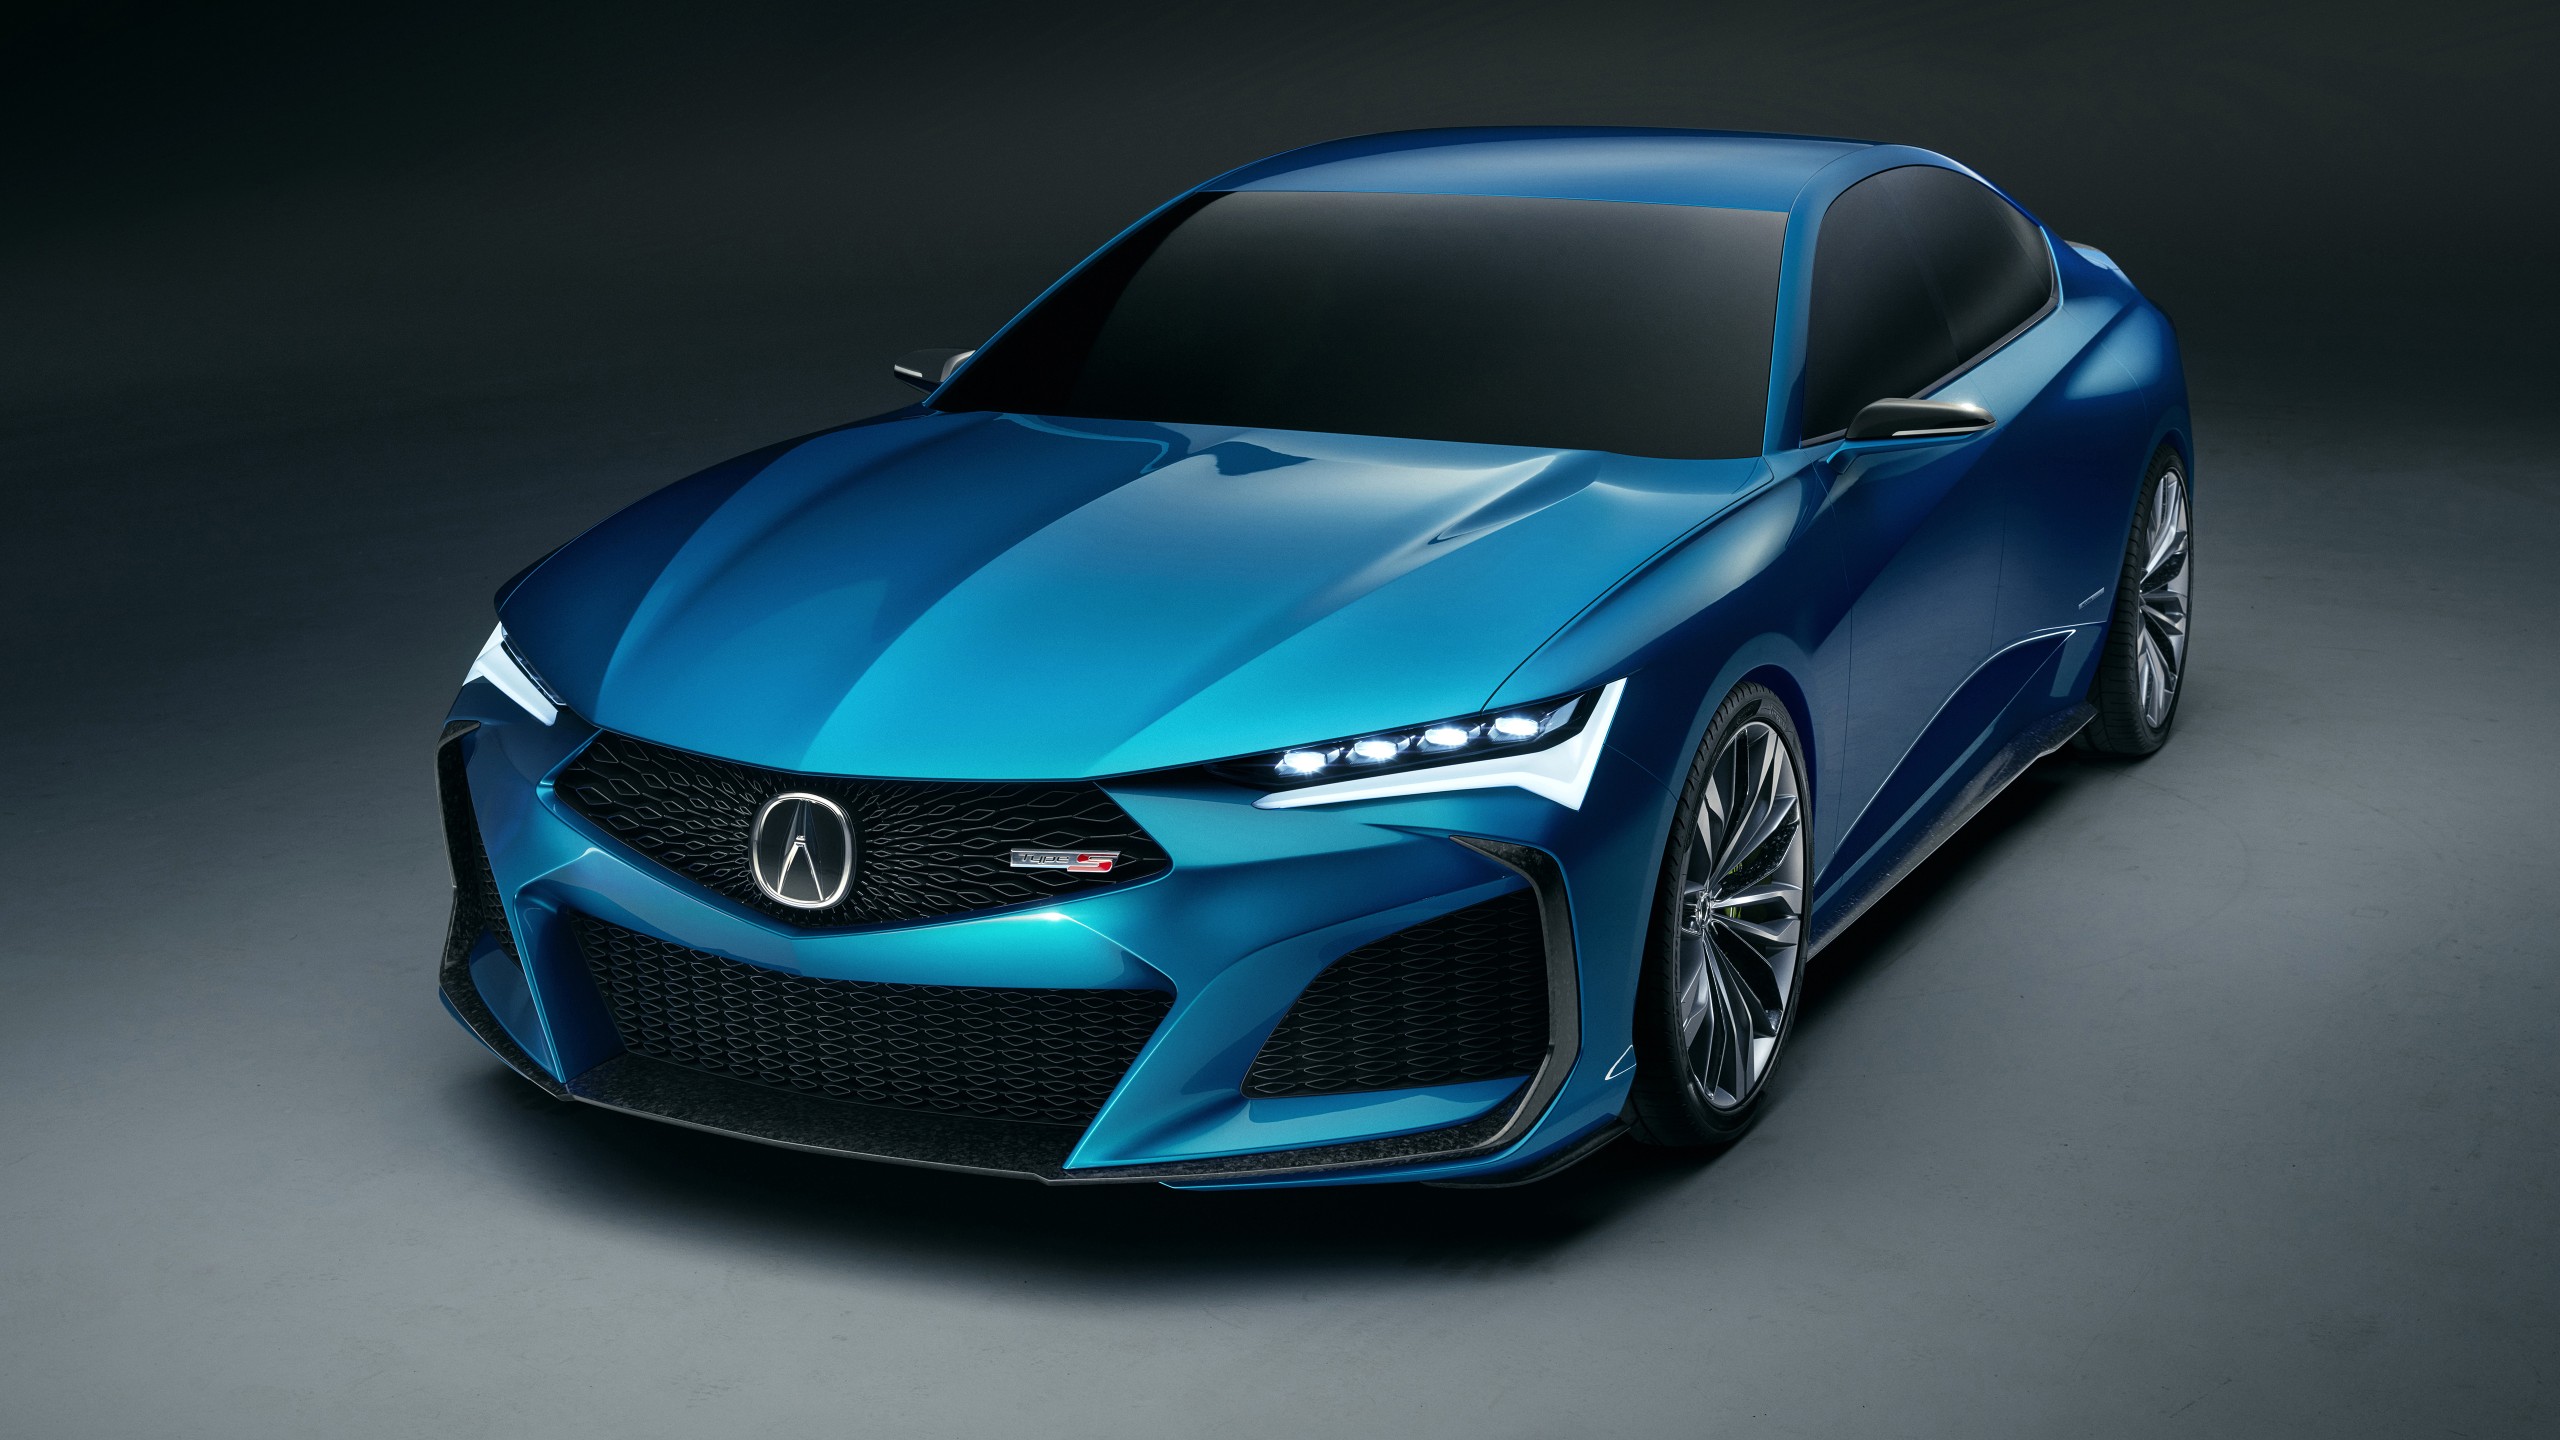 Acura Type S Concept 2019 4K 5 Wallpaper | HD Car Wallpapers | ID #13086